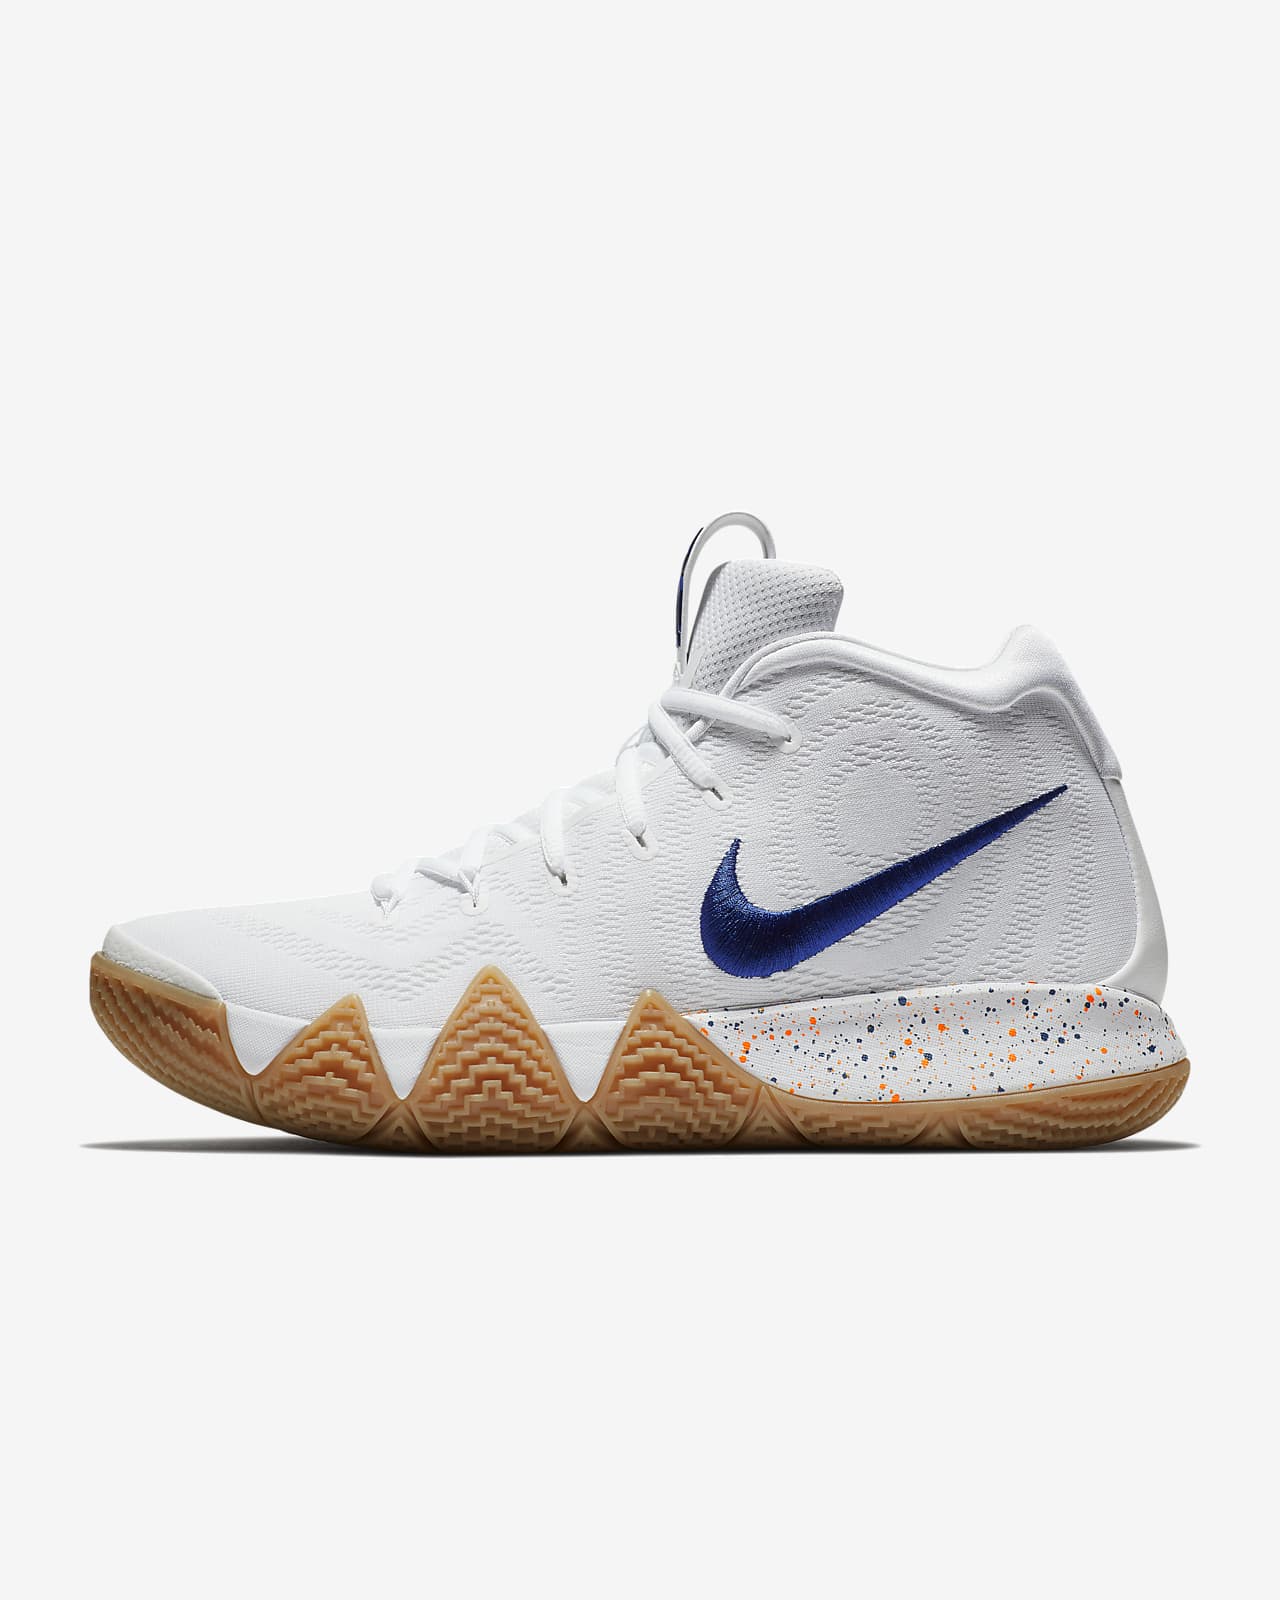 nike kyrie 4 shoes online -